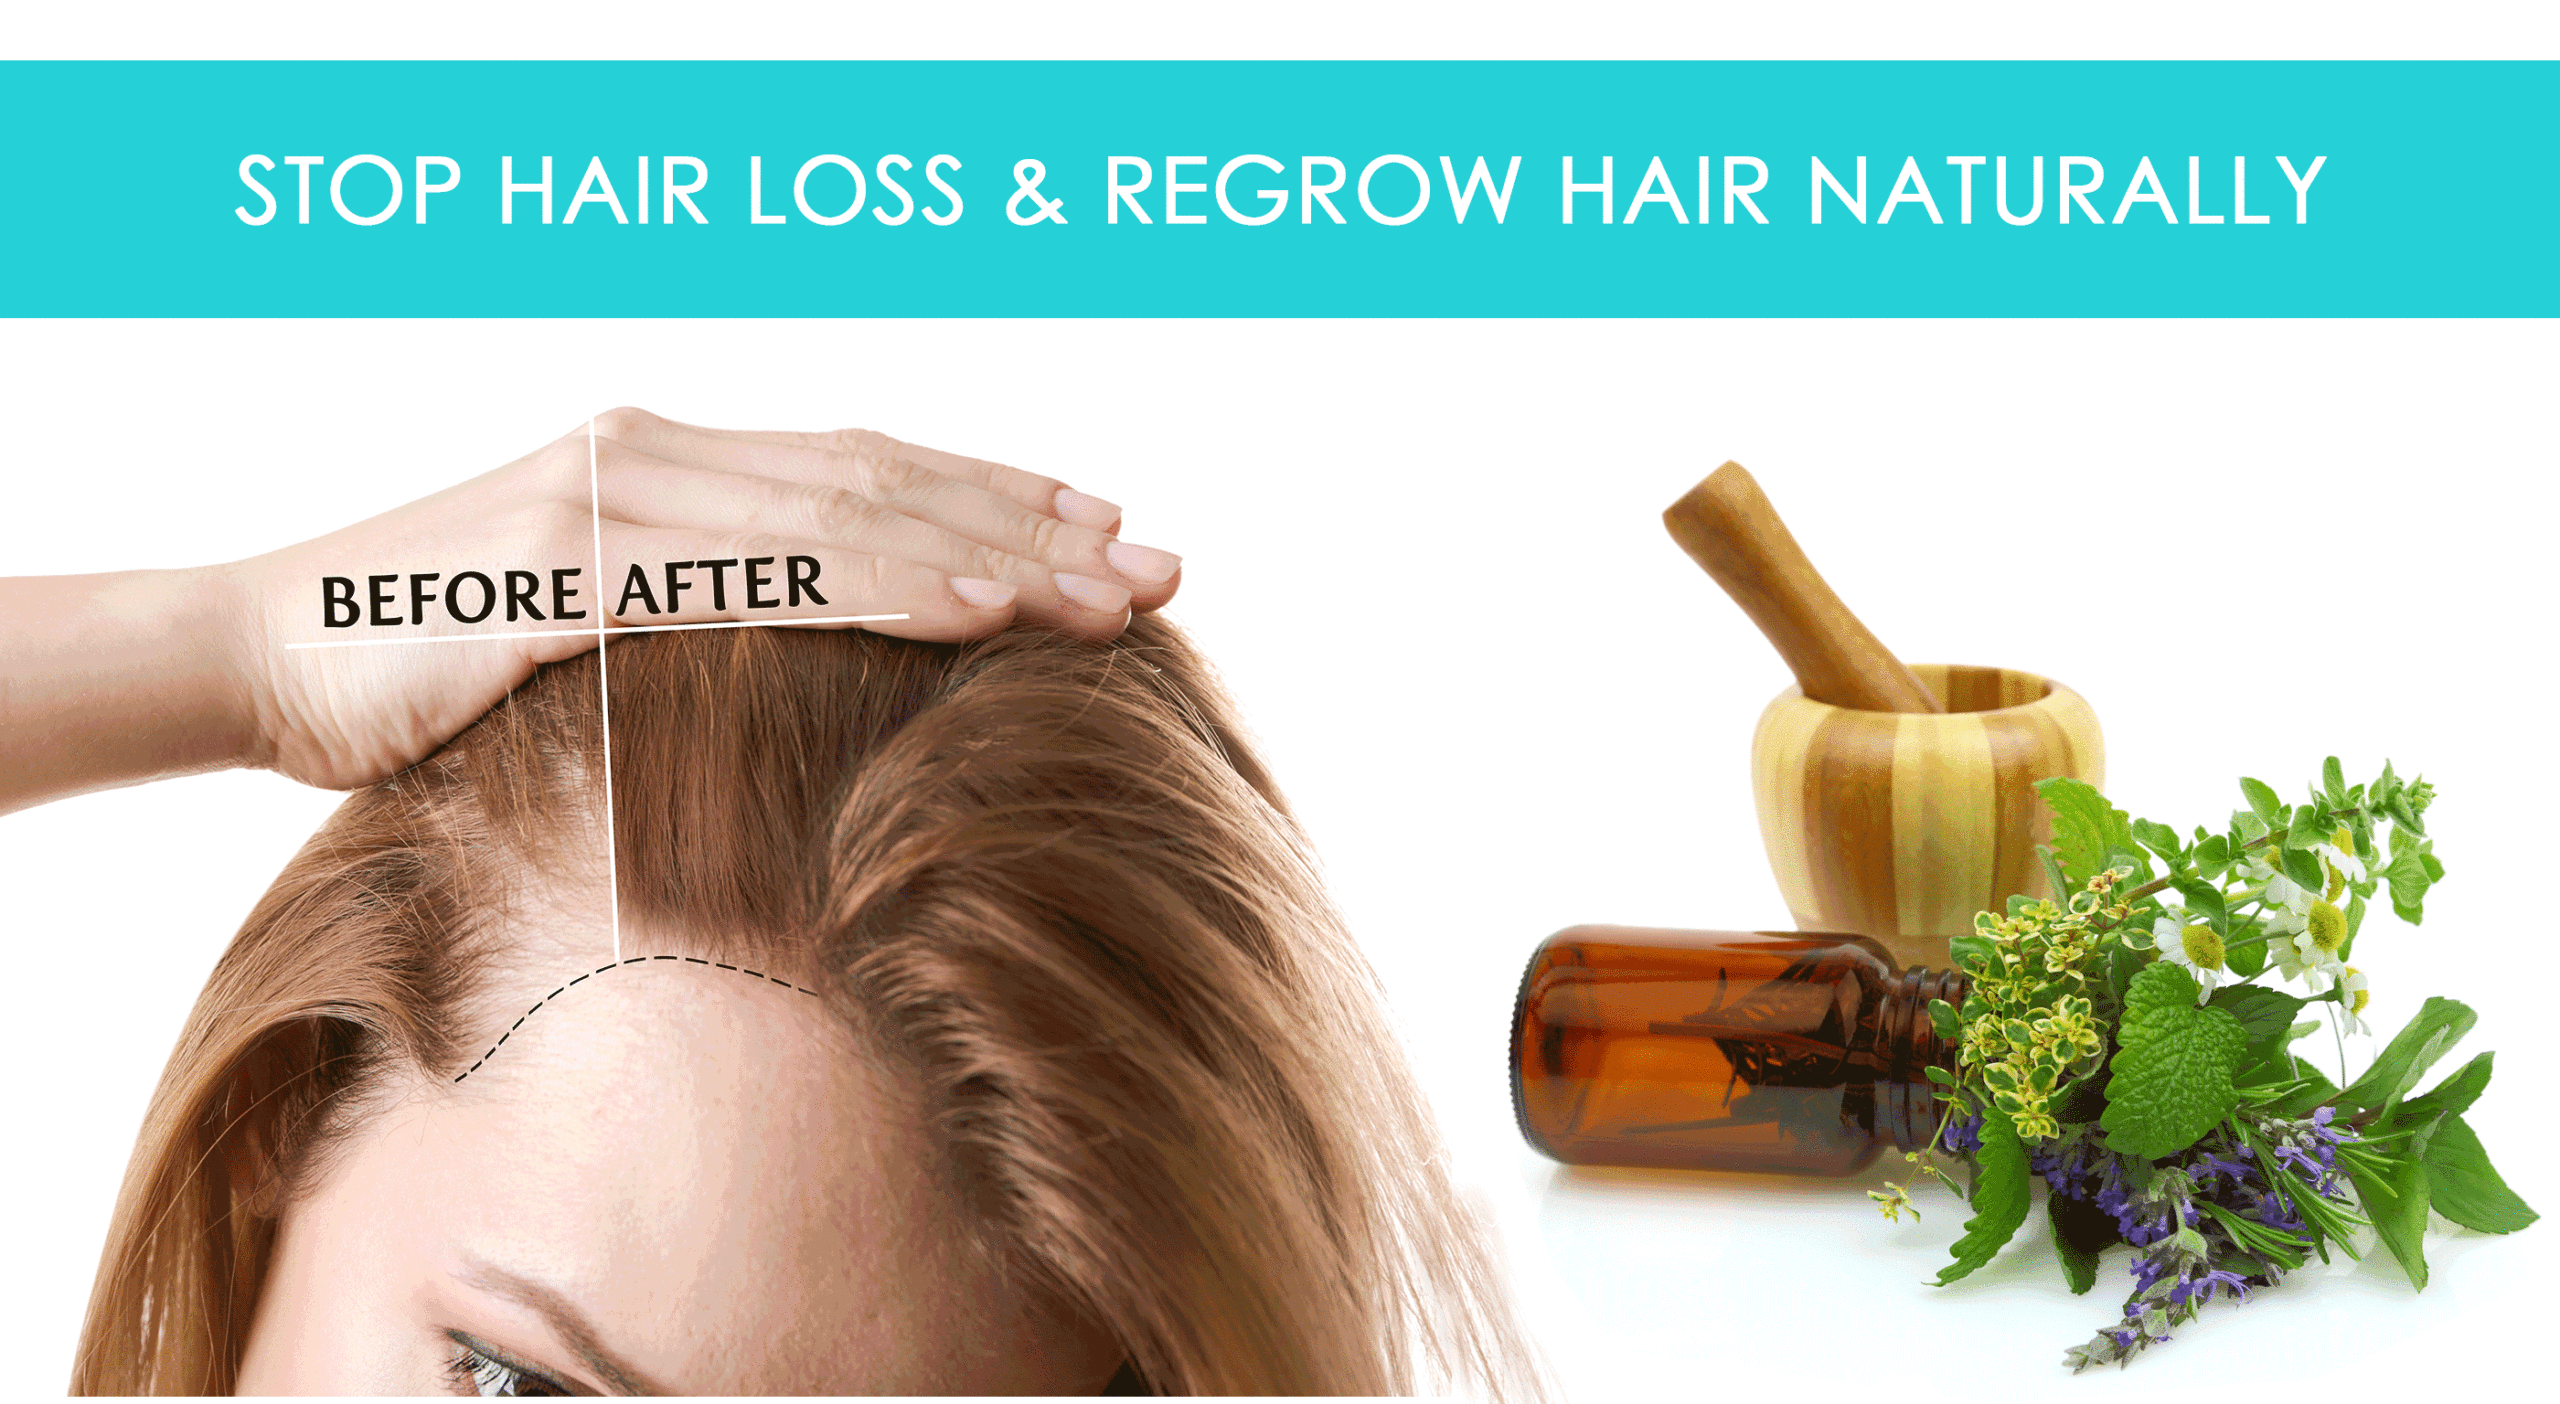 How to stop hair loss and regrow hair naturally - H2O Pure Blue